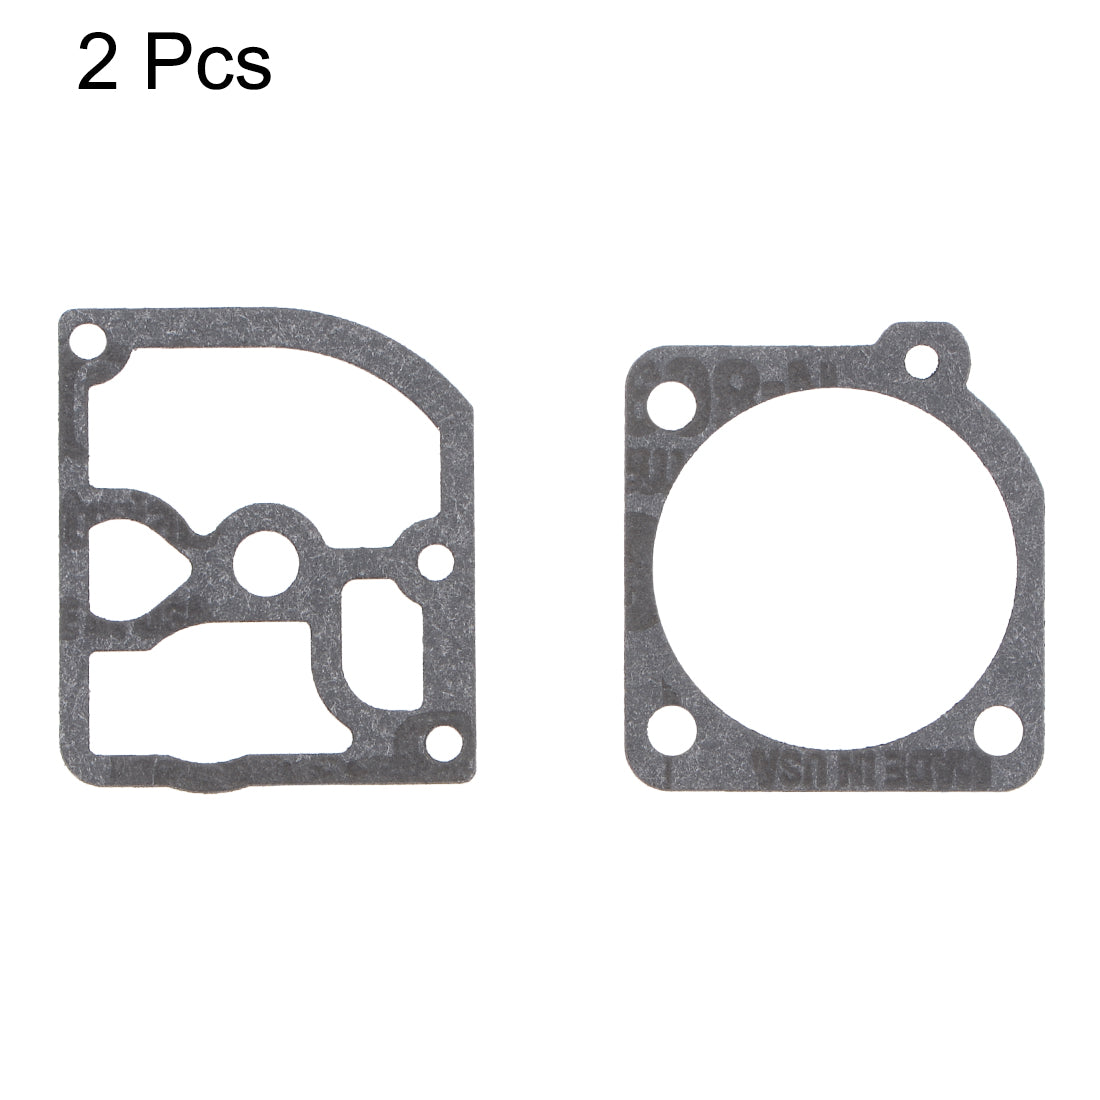 uxcell Uxcell Carburetor Rebuild Kit Gasket Diaphragm GND-35 for Homelite 250 Chainsaw HBC-40 McCulloch 3200 3210 3214 3216 3516 Engines Carb 2pcs